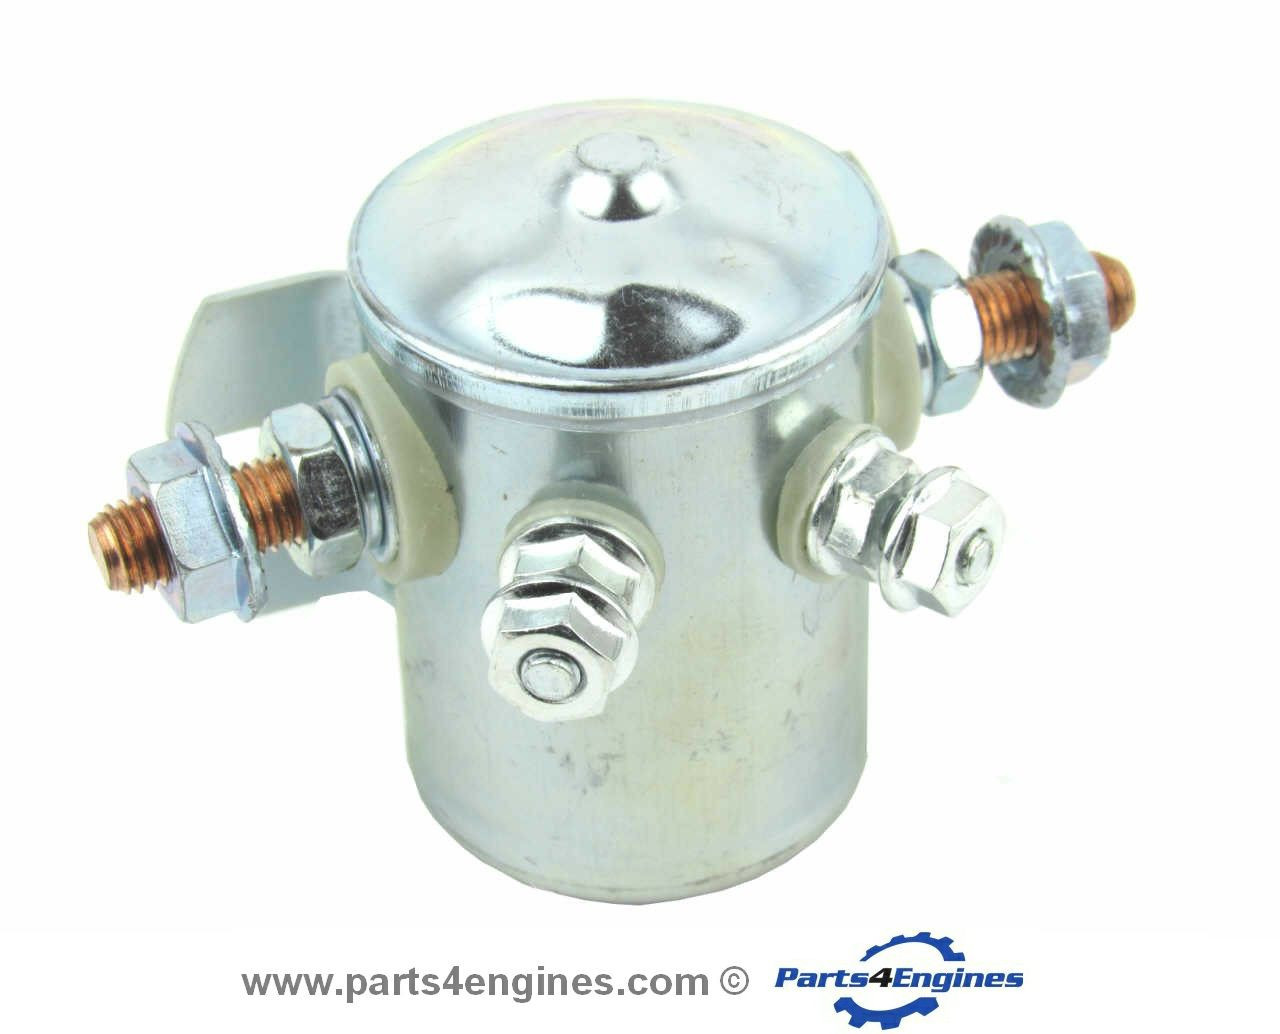 Perkins 4.107 Starter solenoid from parts4engines.com